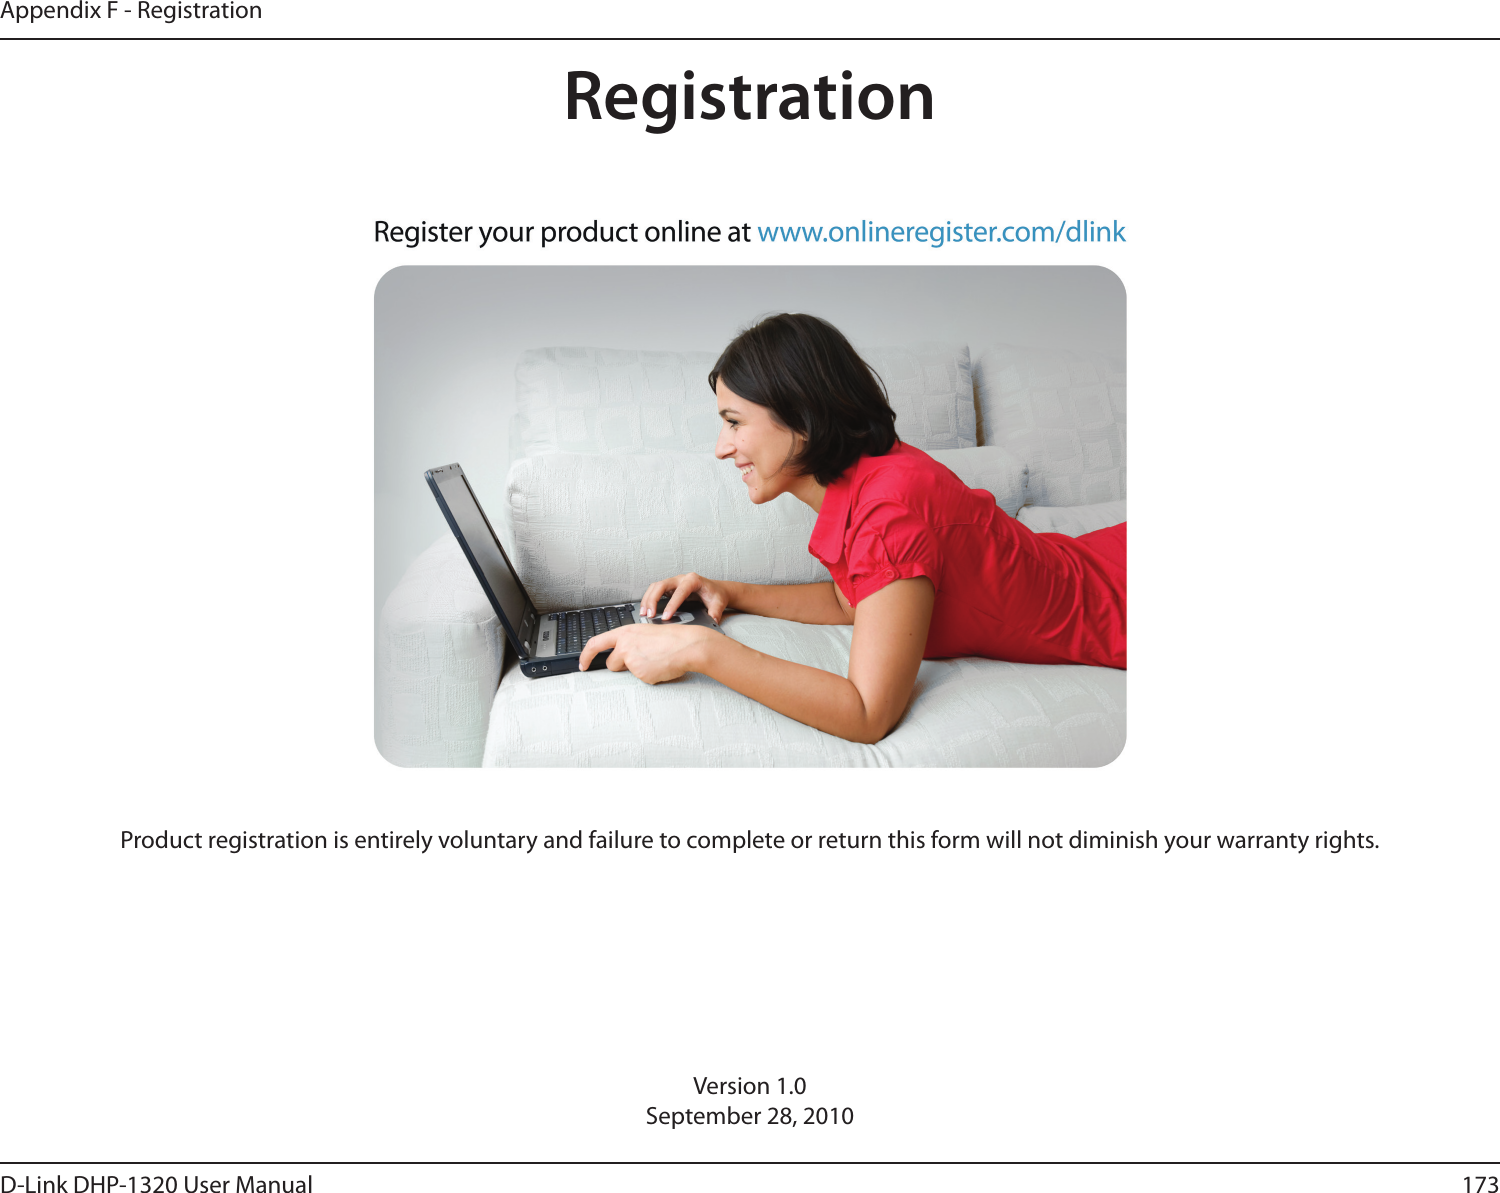 173D-Link DHP-1320 User ManualAppendix F - RegistrationVersion 1.0September 28, 2010Product registration is entirely voluntary and failure to complete or return this form will not diminish your warranty rights.Registration